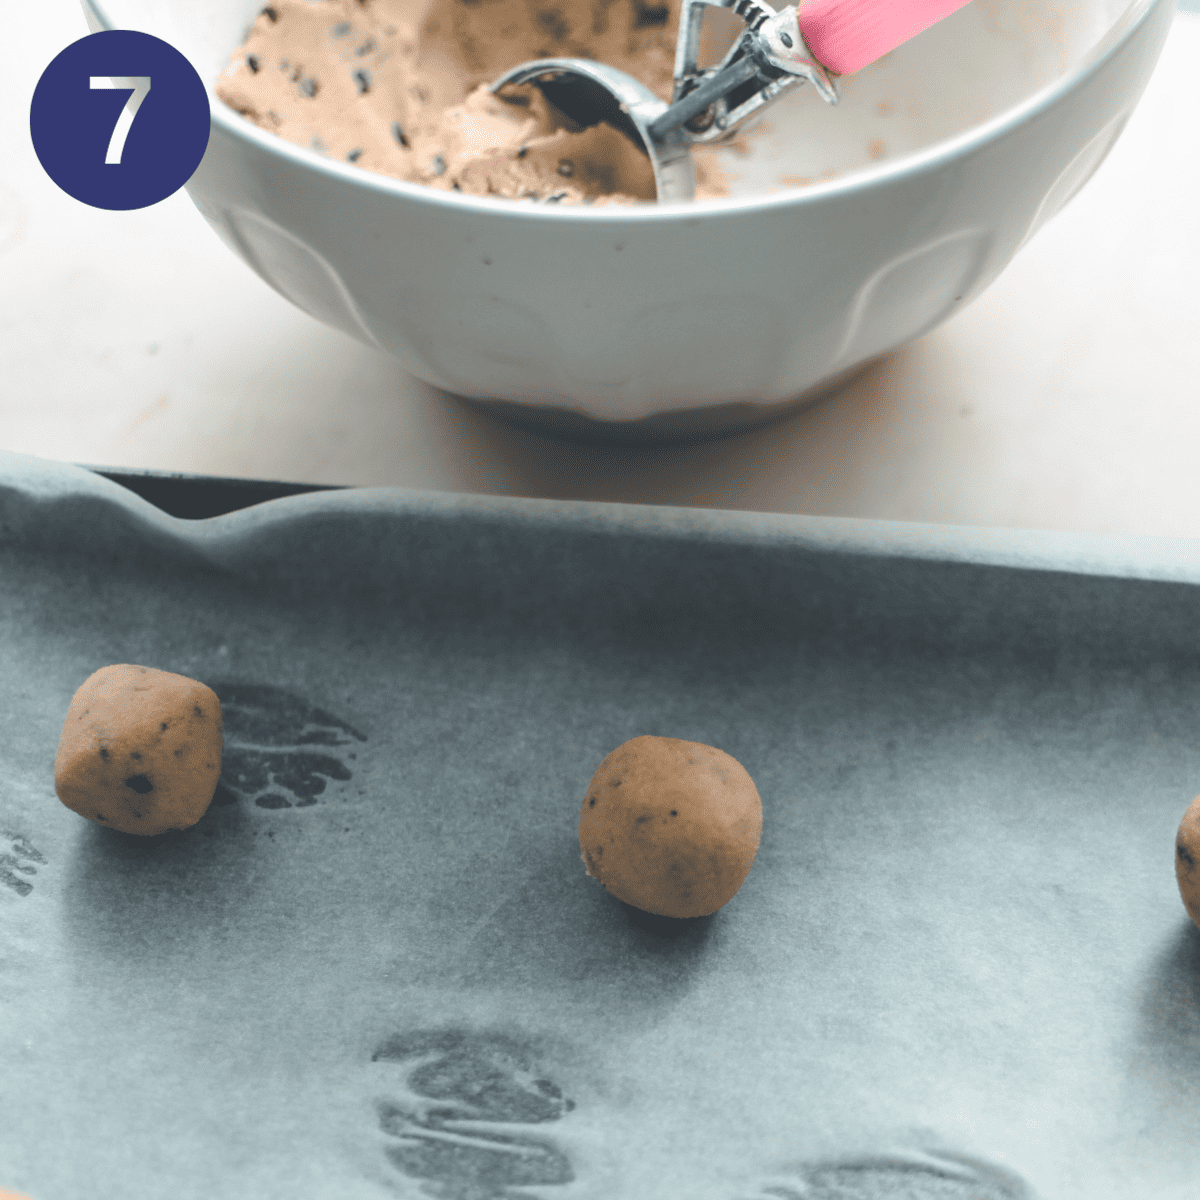 Putting balls of cookie dough on a baking tray.